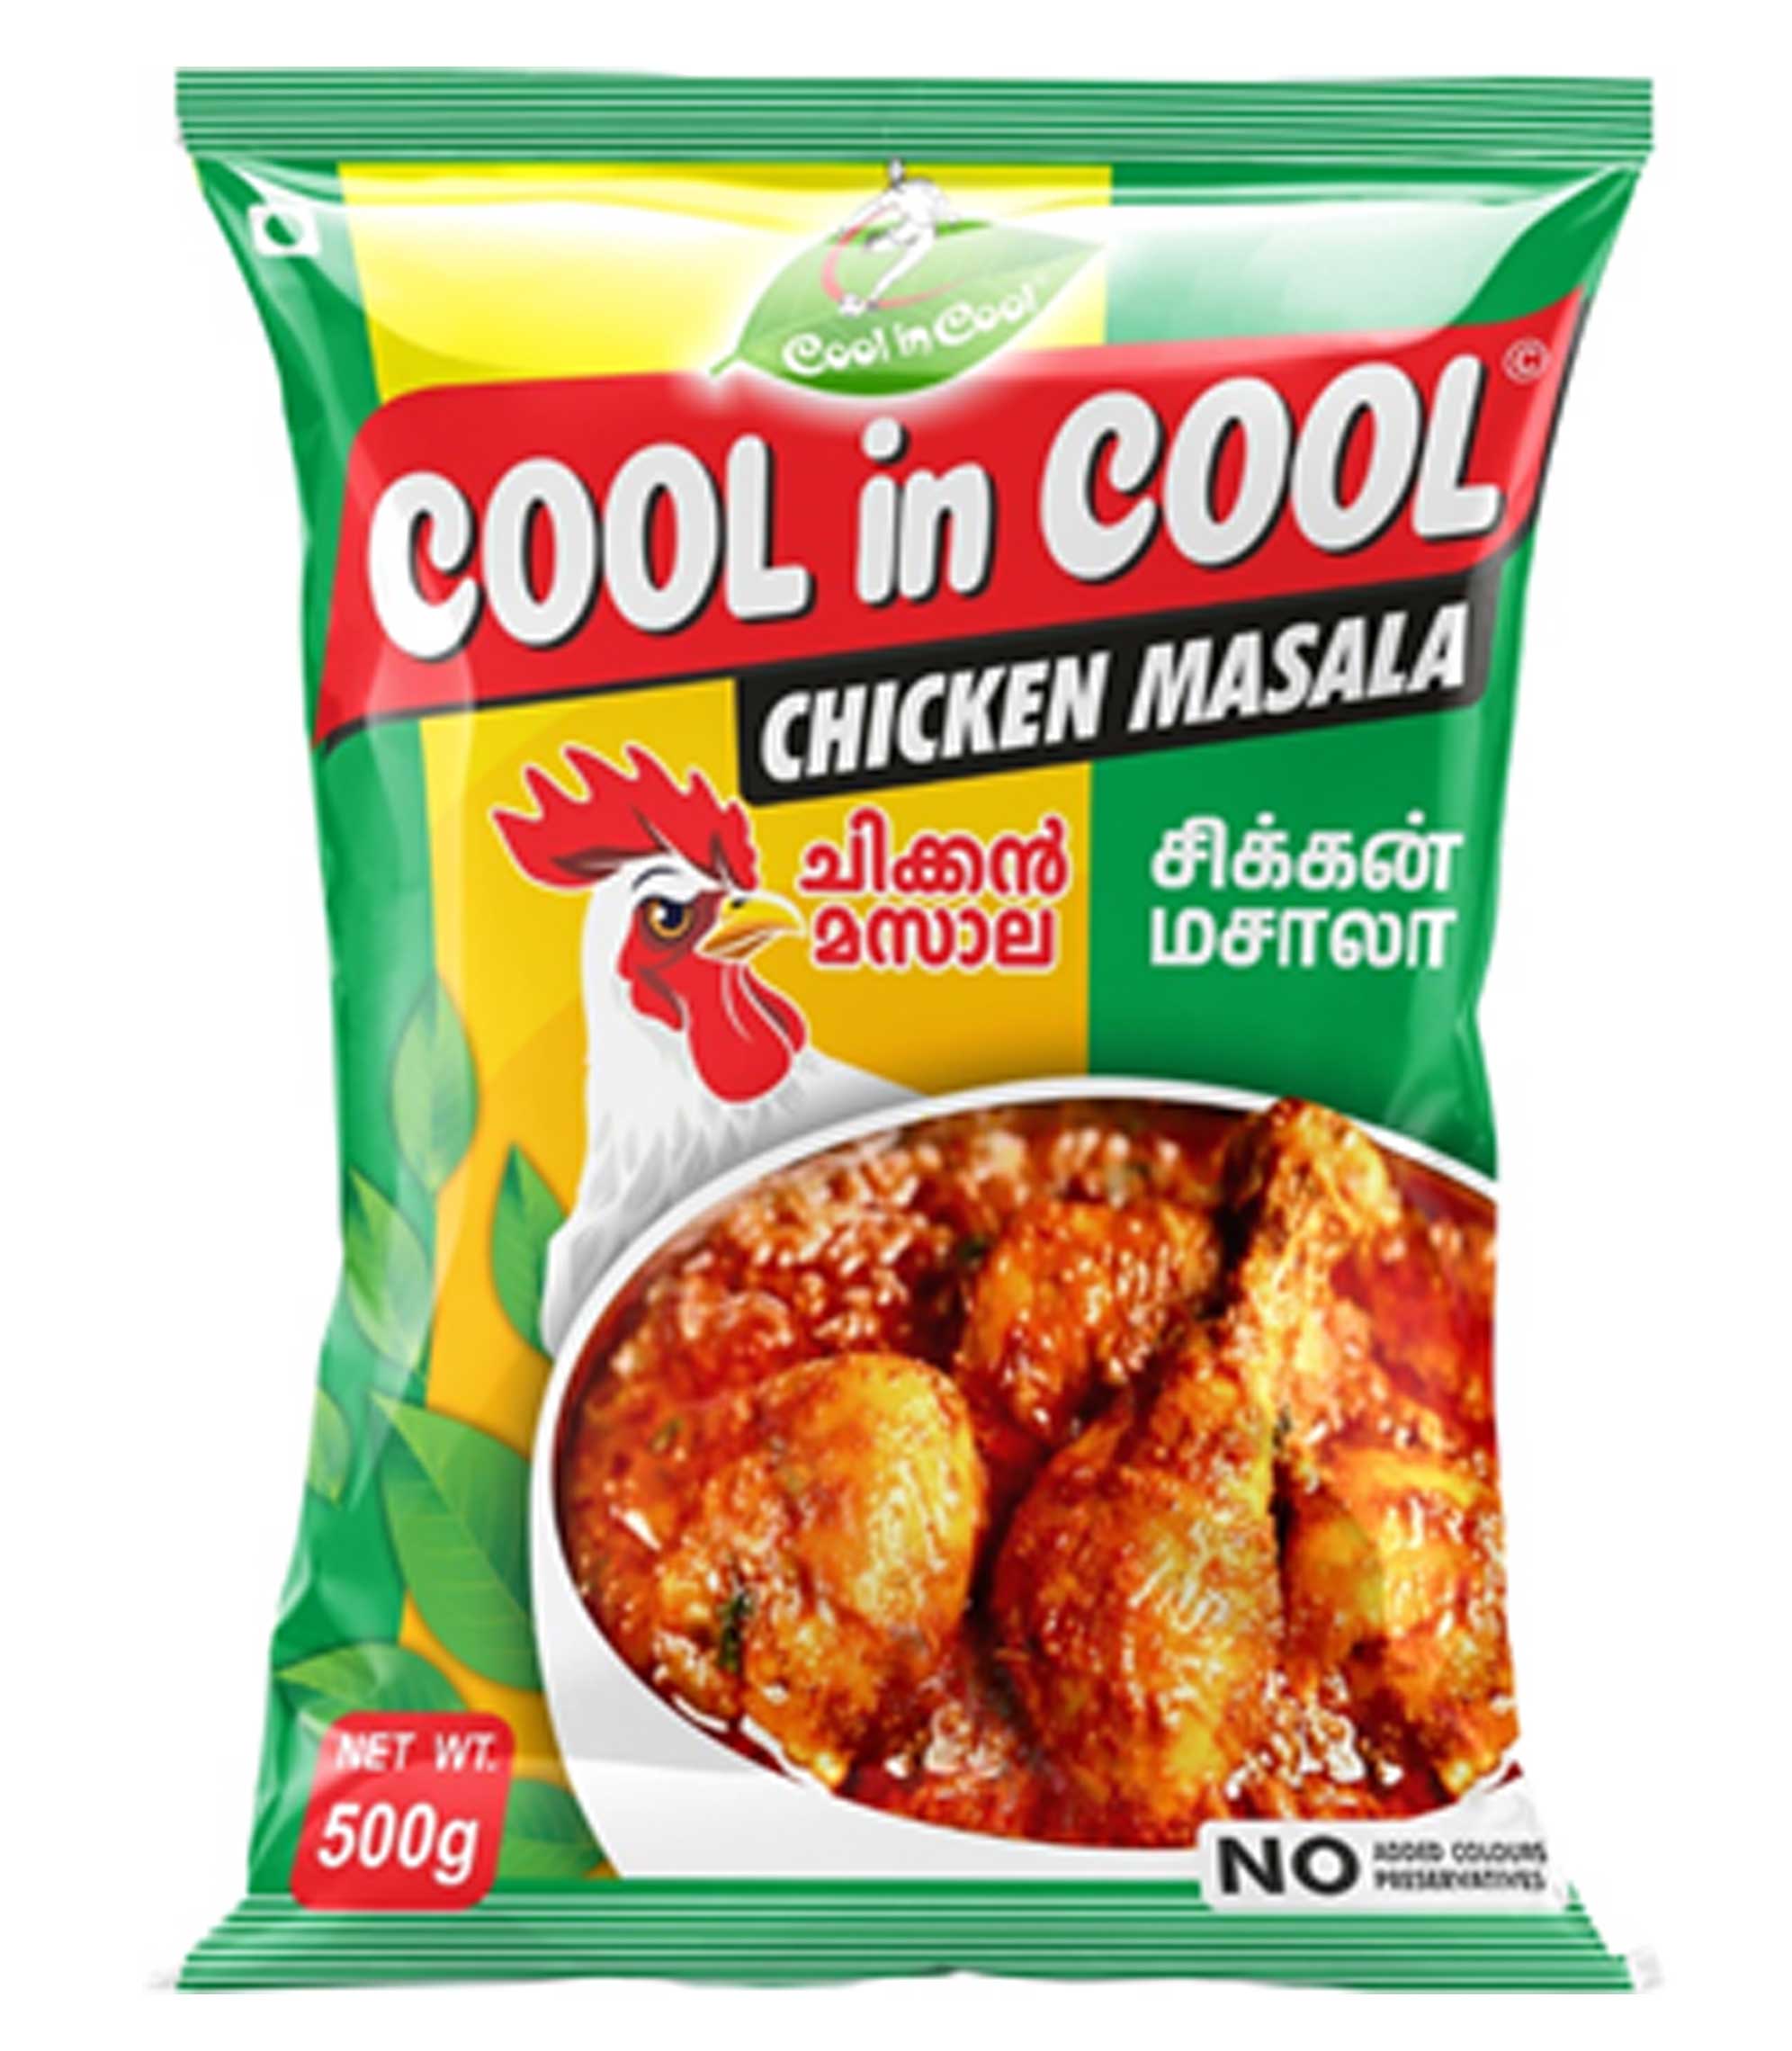 Chicken Masala - Cool in Cool Masala - Best Masala Products ...